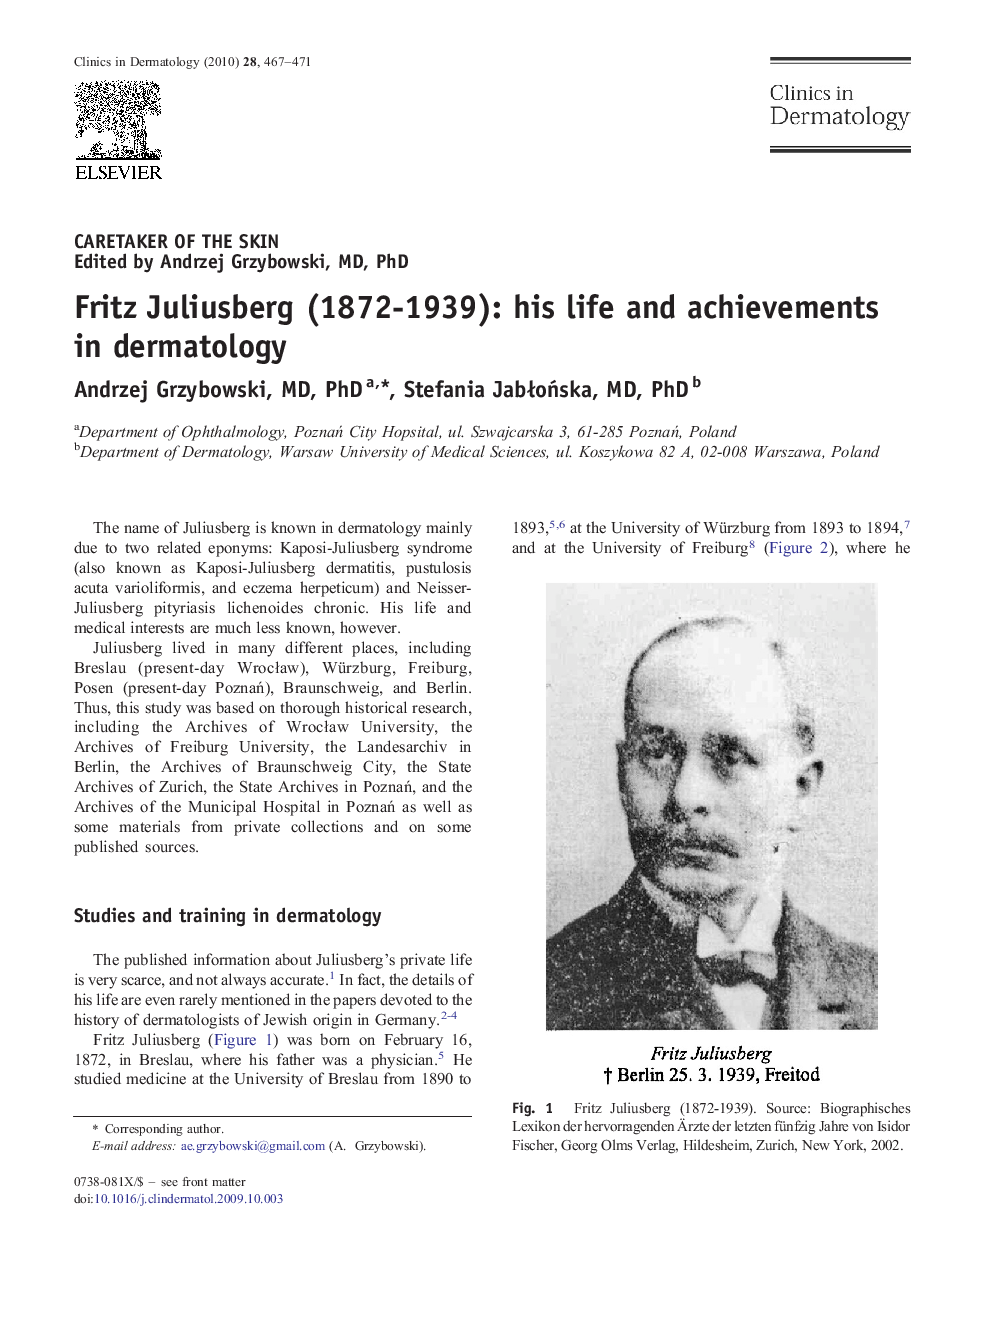 Fritz Juliusberg (1872-1939): his life and achievements in dermatology